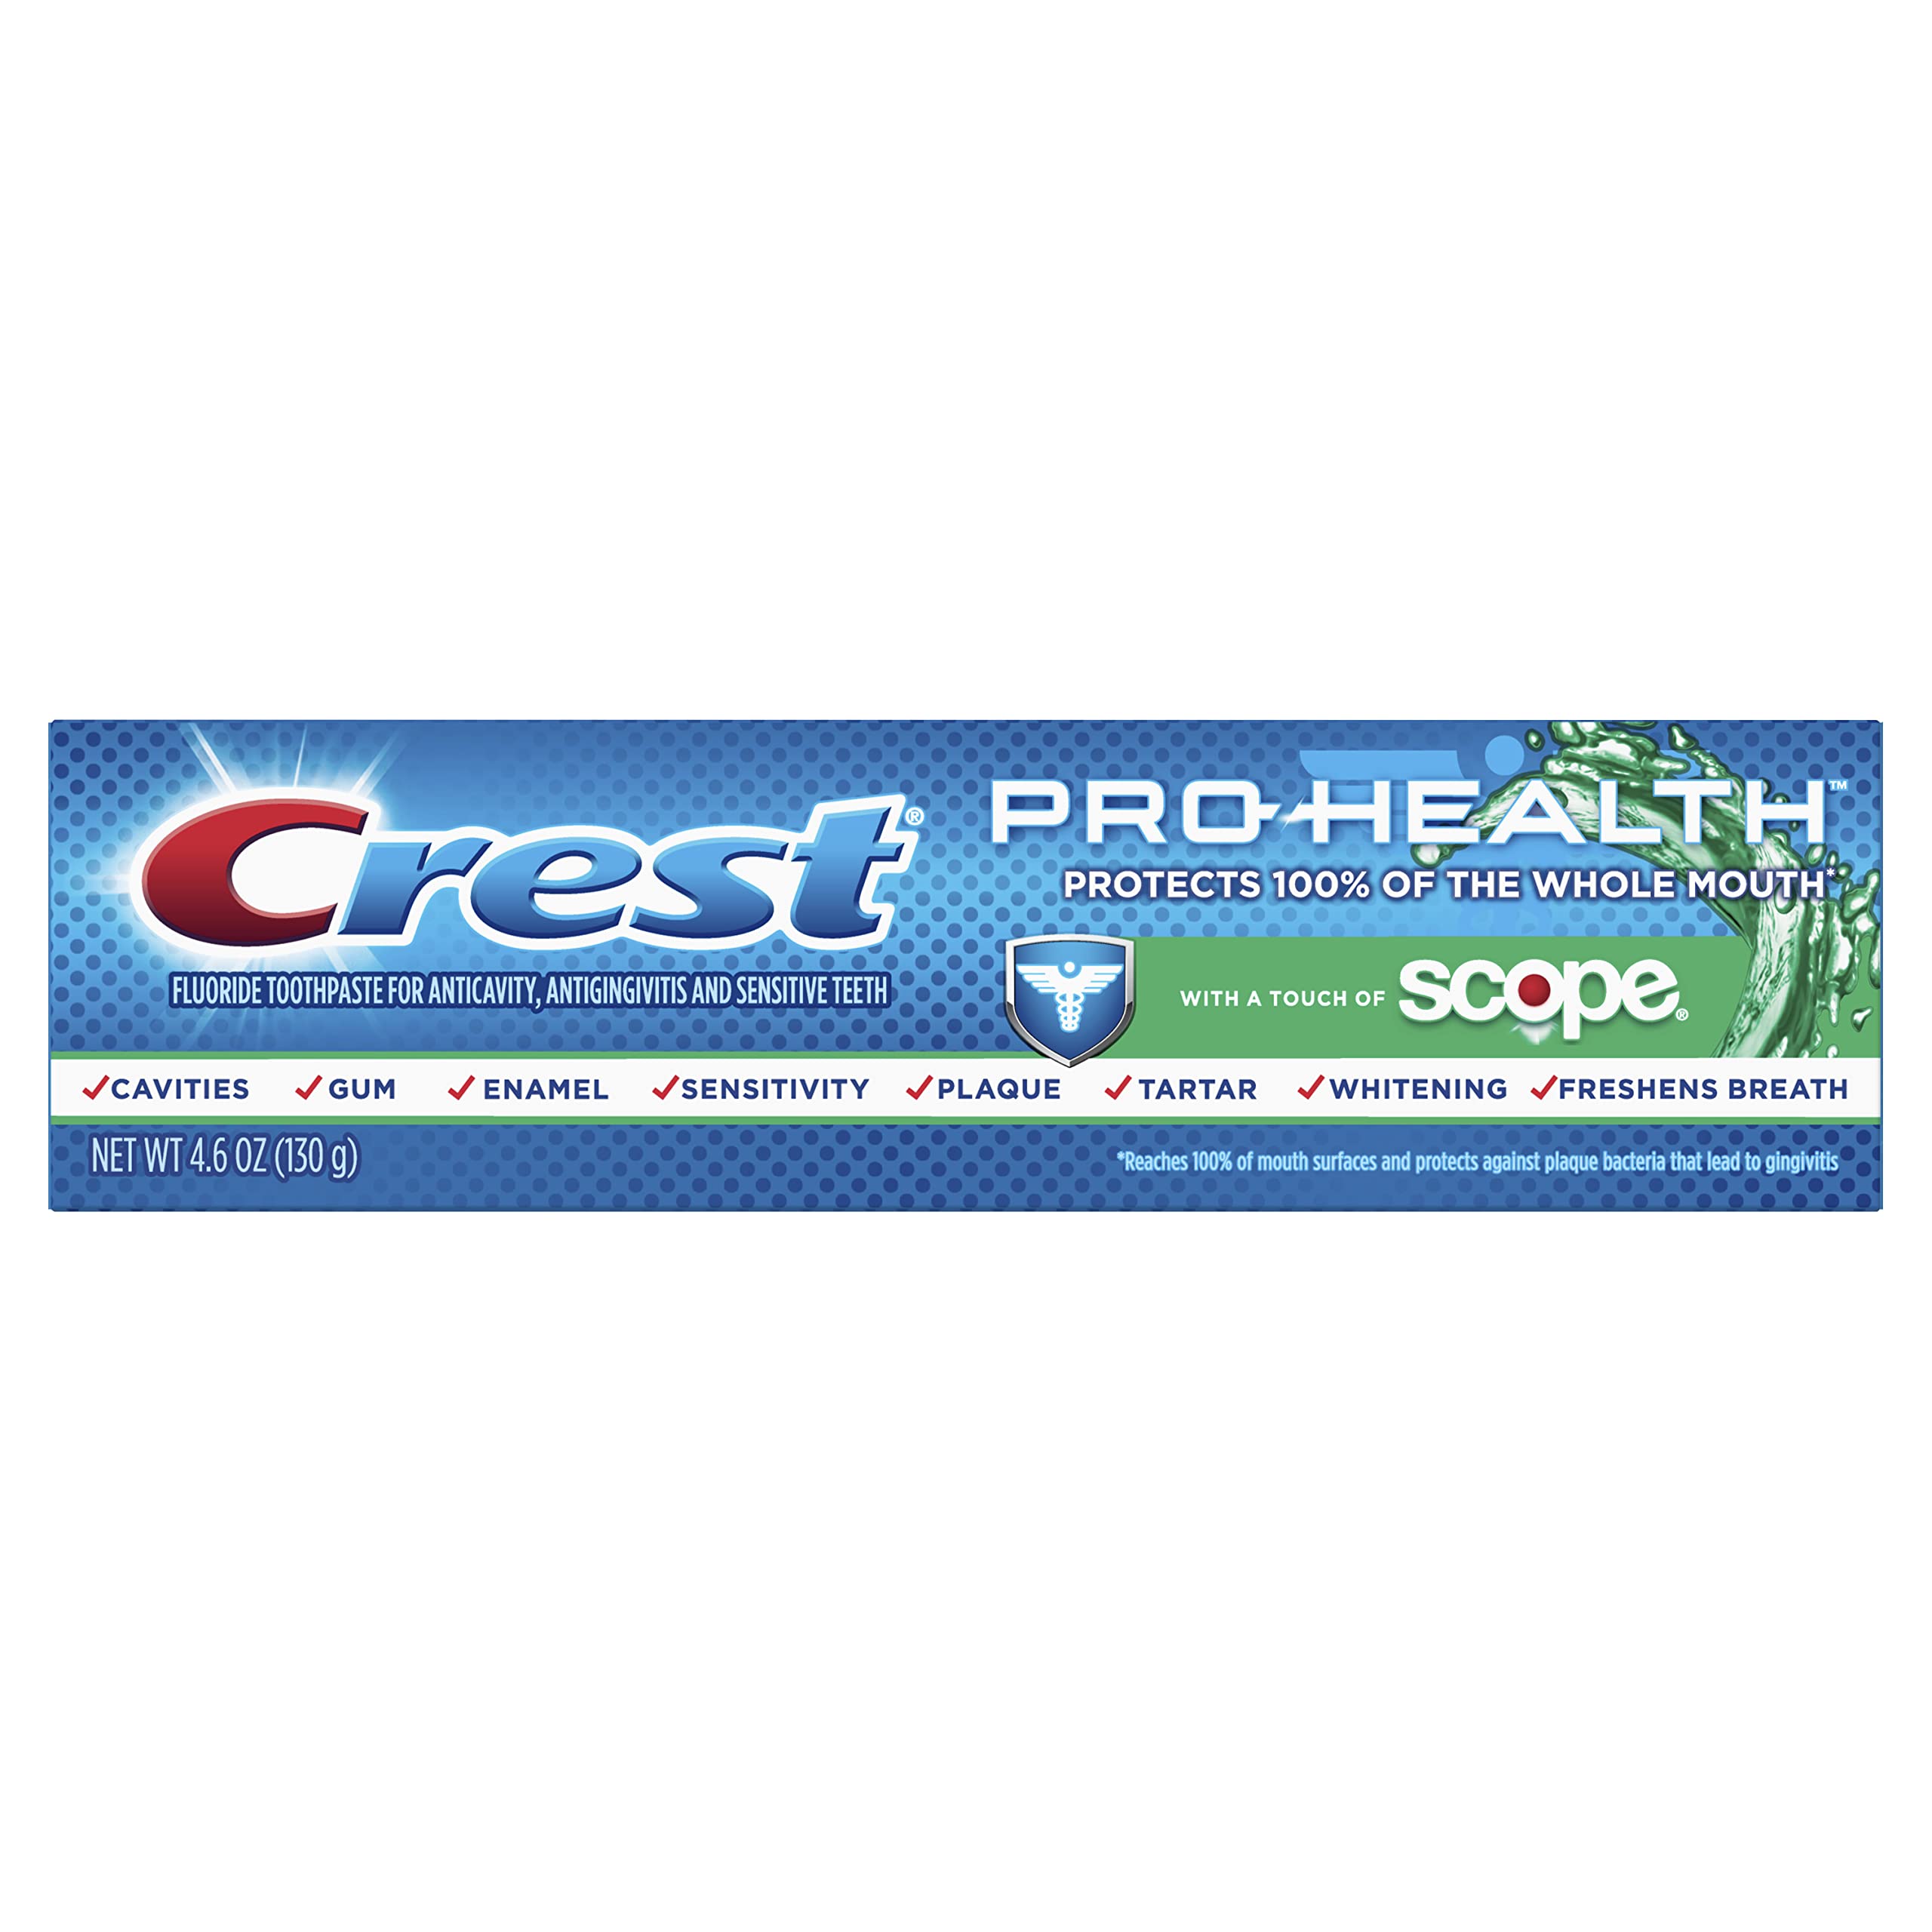 Crest Crest Pro-health With A Touch Ofx 40mm Whitening Toothpaste, 4.6 Oz, 4.6 Oz